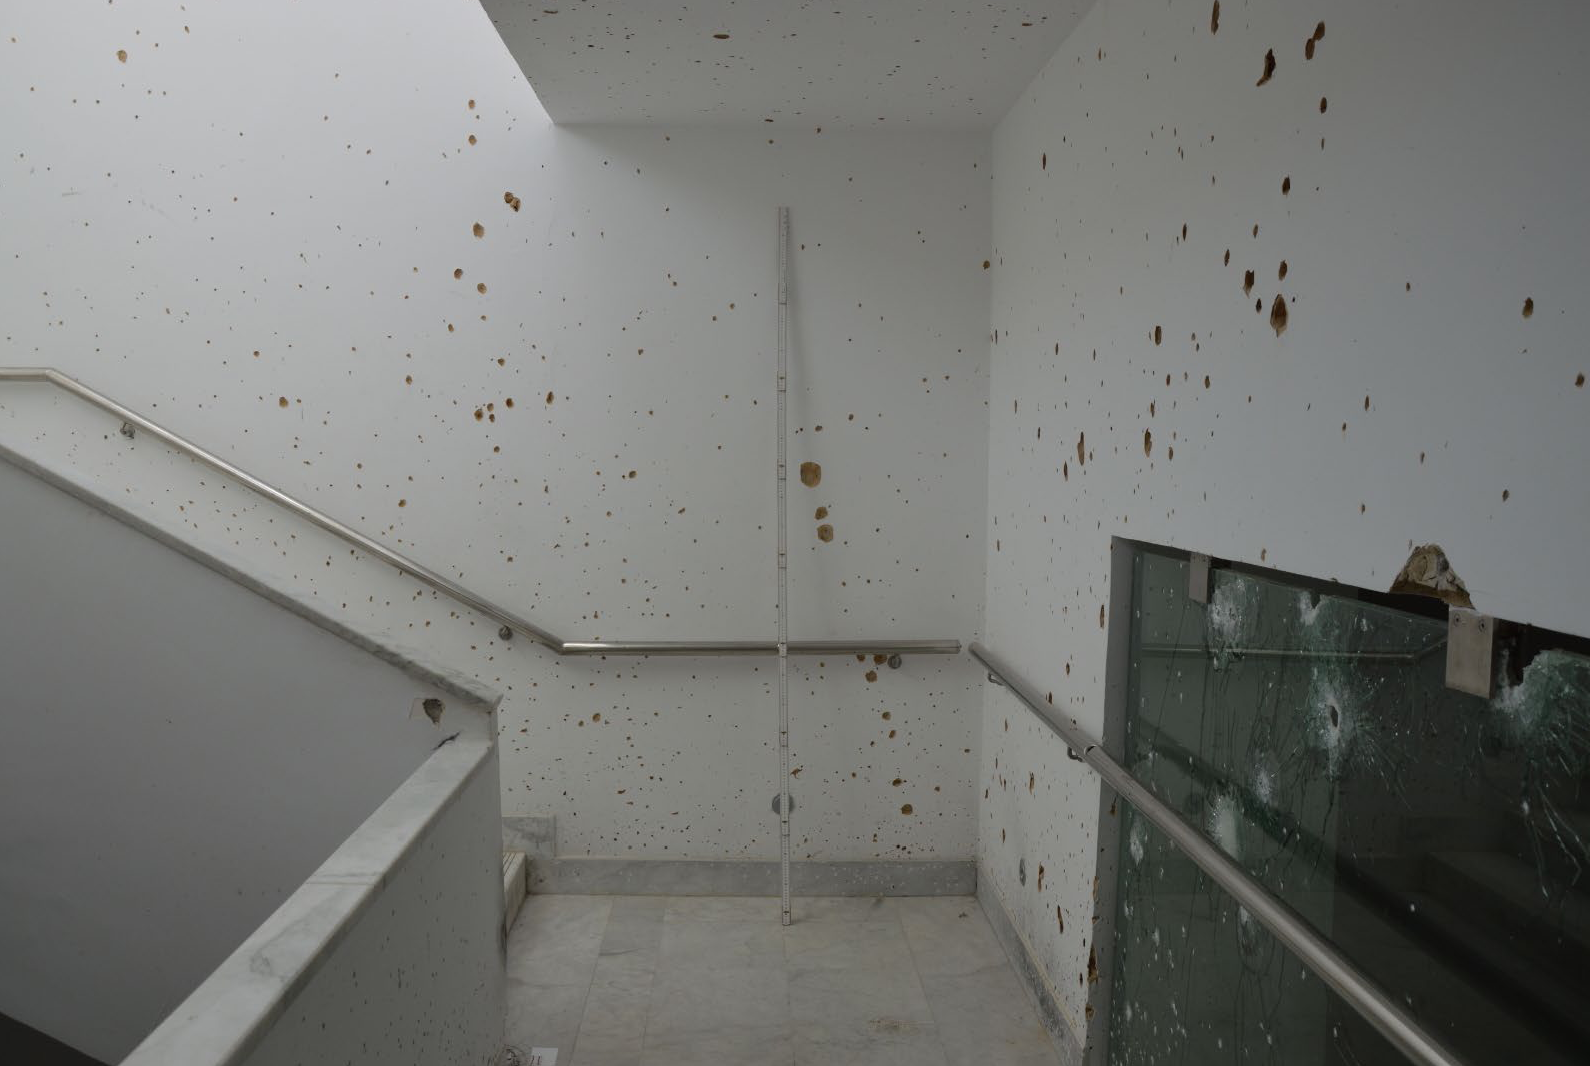 The Walls Sprayed With Bullets